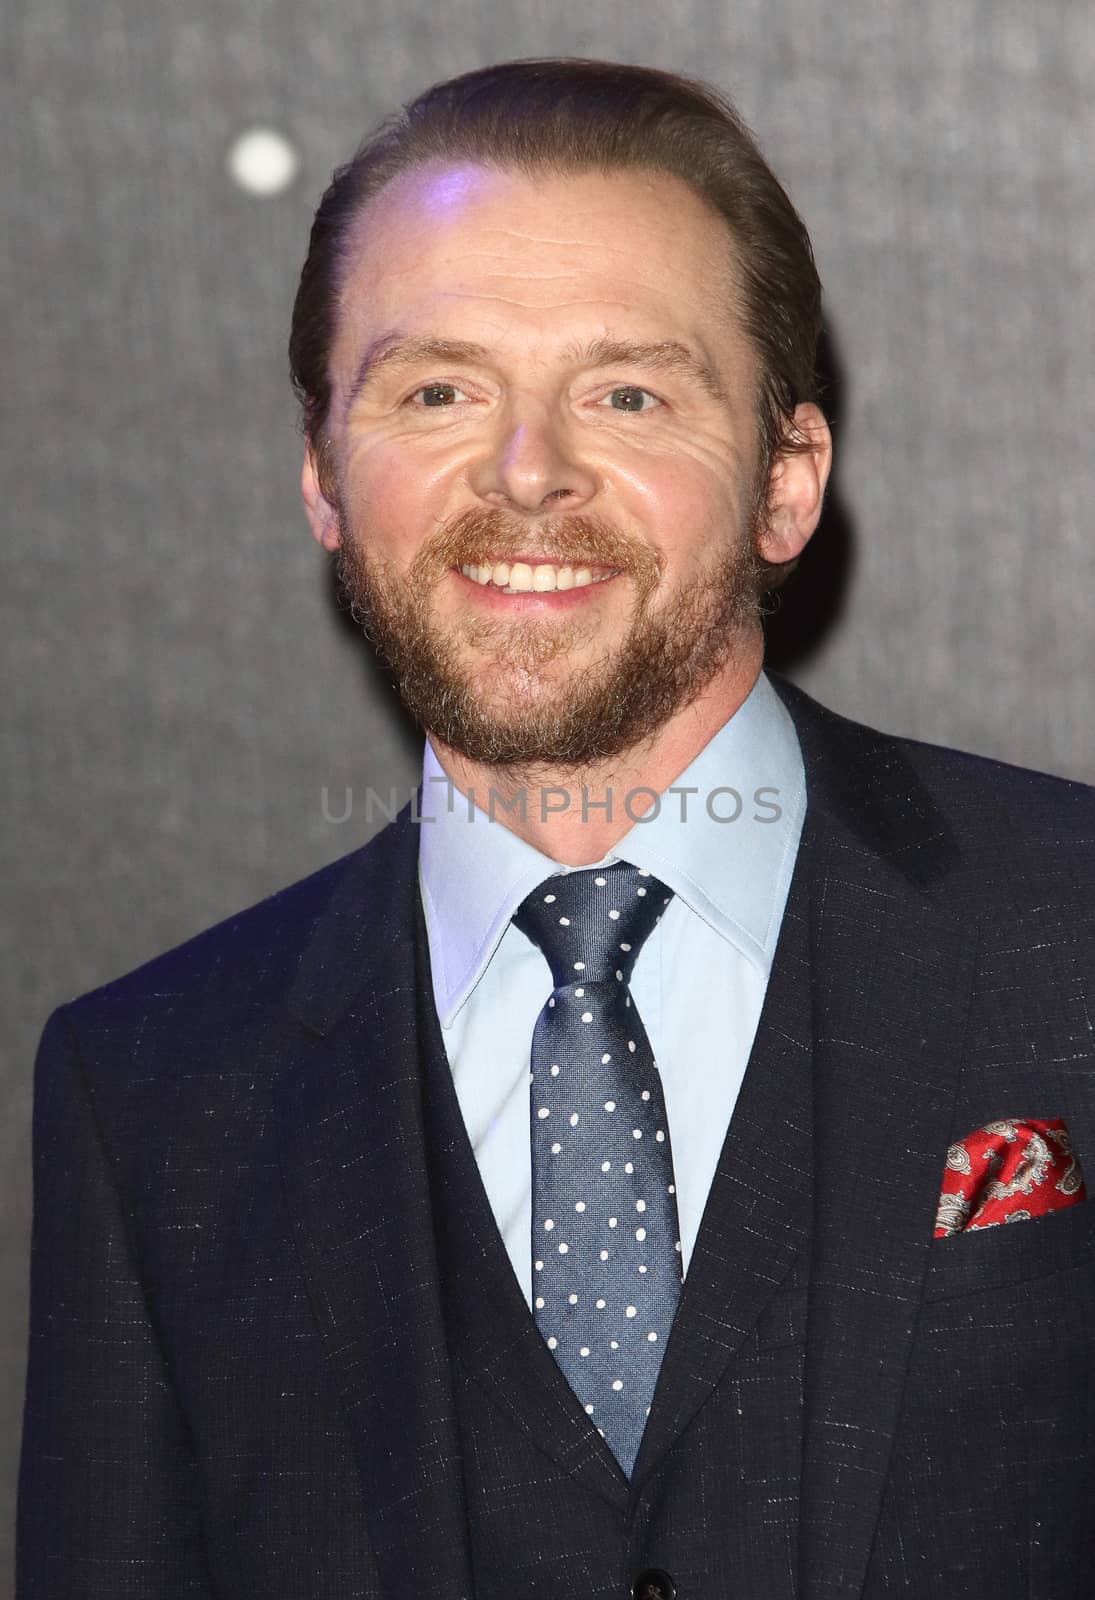 UNITED-KINGDOM, London : English actor Simon Pegg poses for photographers while Star Wars cast, crew and celebrities hit the red carpet for the last episode The Force Awakens European Premiere on December 16, 2015 in central London.   	